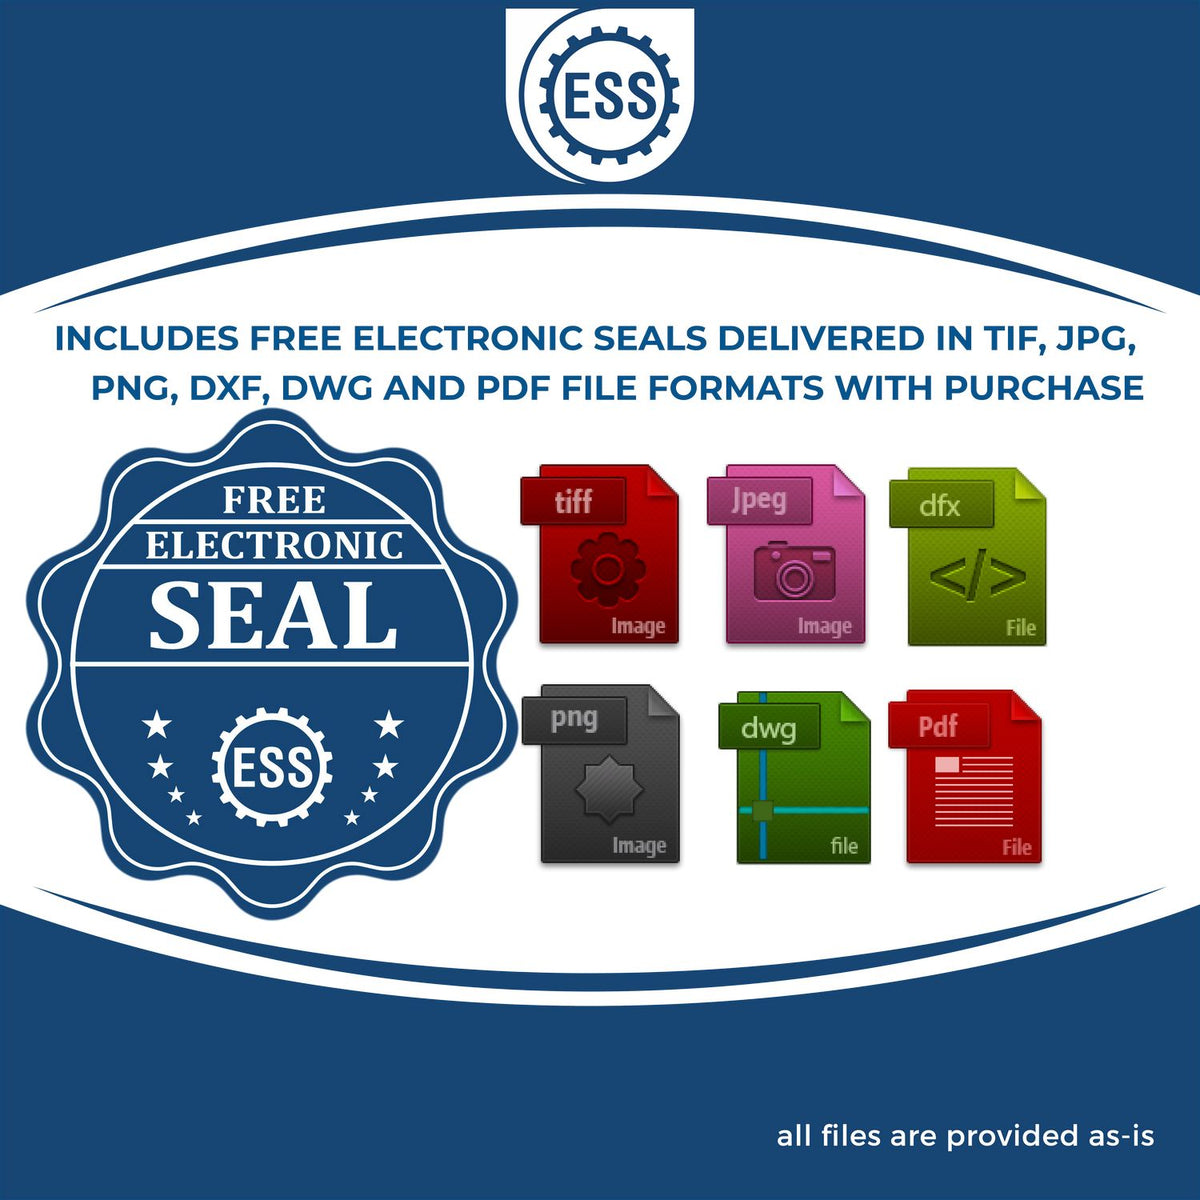 An infographic for the free electronic seal for the Long Reach Mississippi Land Surveyor Seal illustrating the different file type icons such as DXF, DWG, TIF, JPG and PNG.